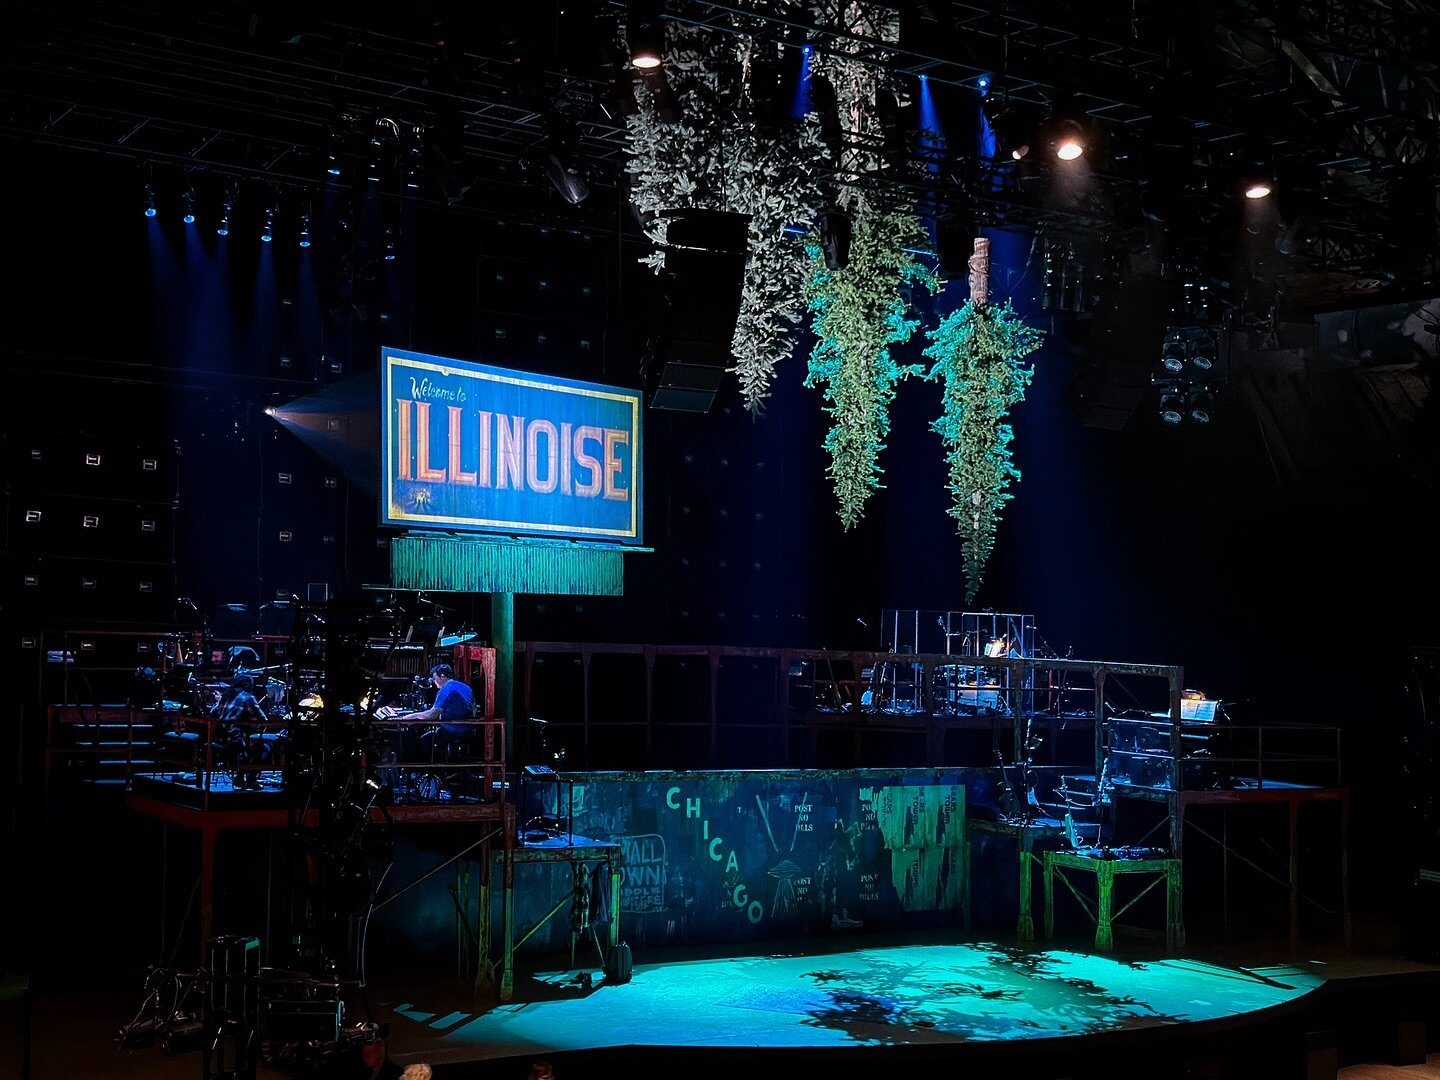 Come on! Feel the&hellip; @illinoiseonstage @sufjan I&rsquo;m already ready to cry already.